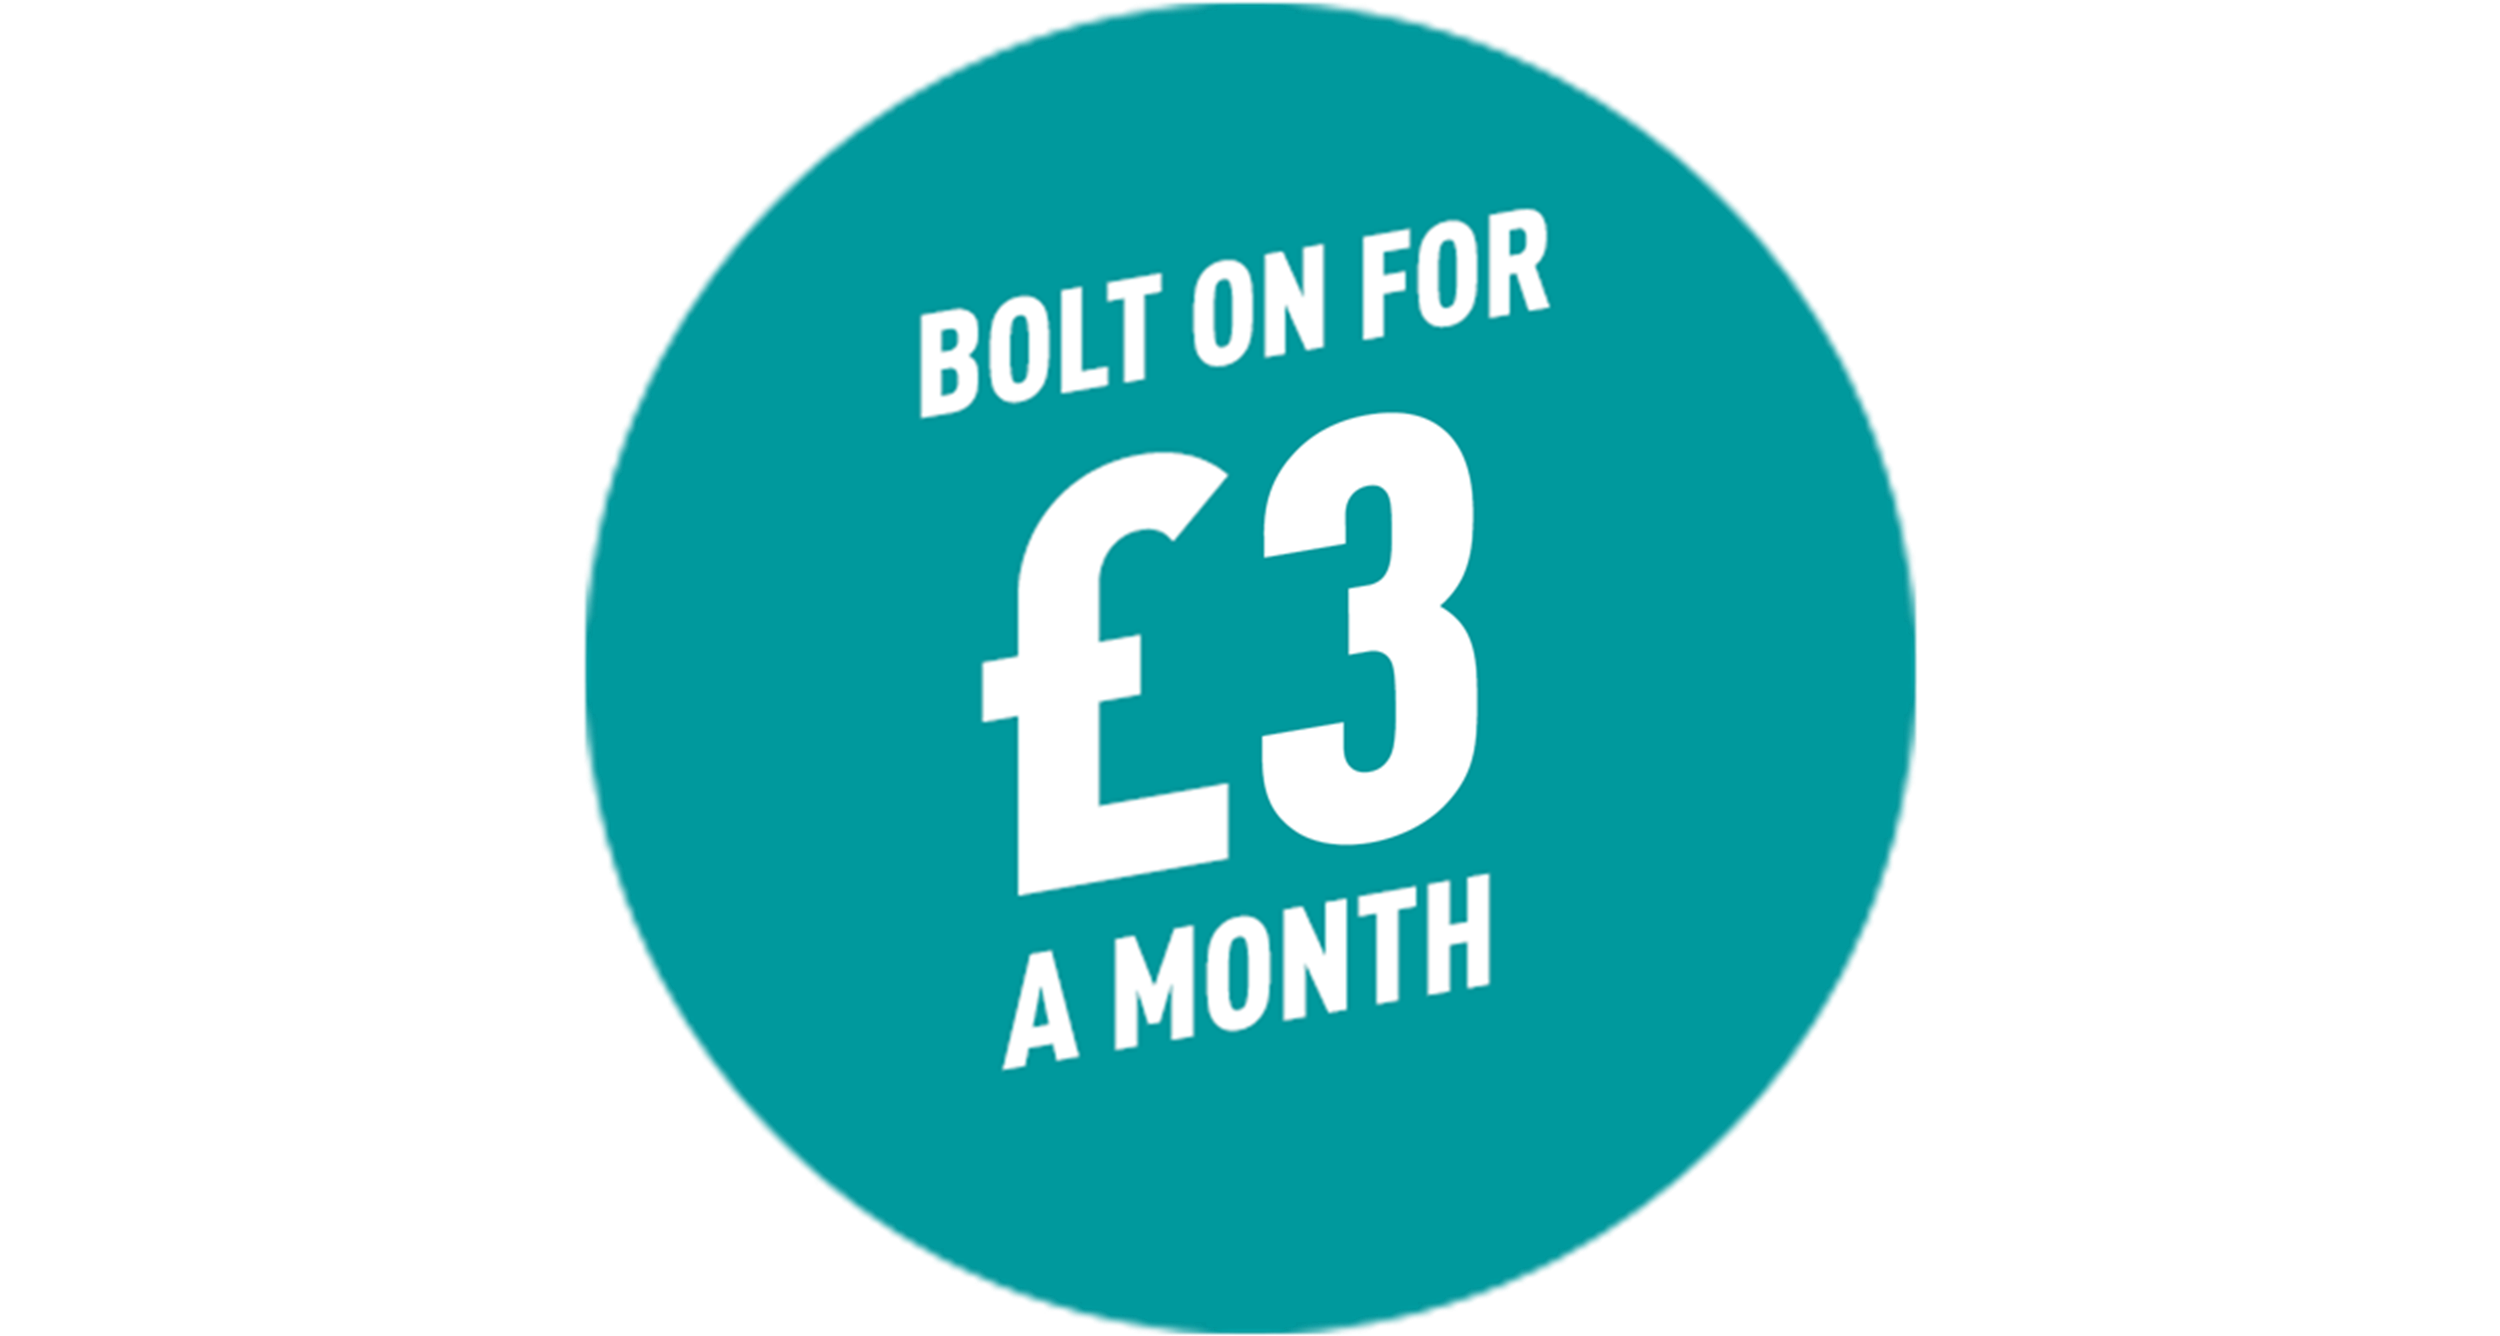 Bolt on from £4 a month